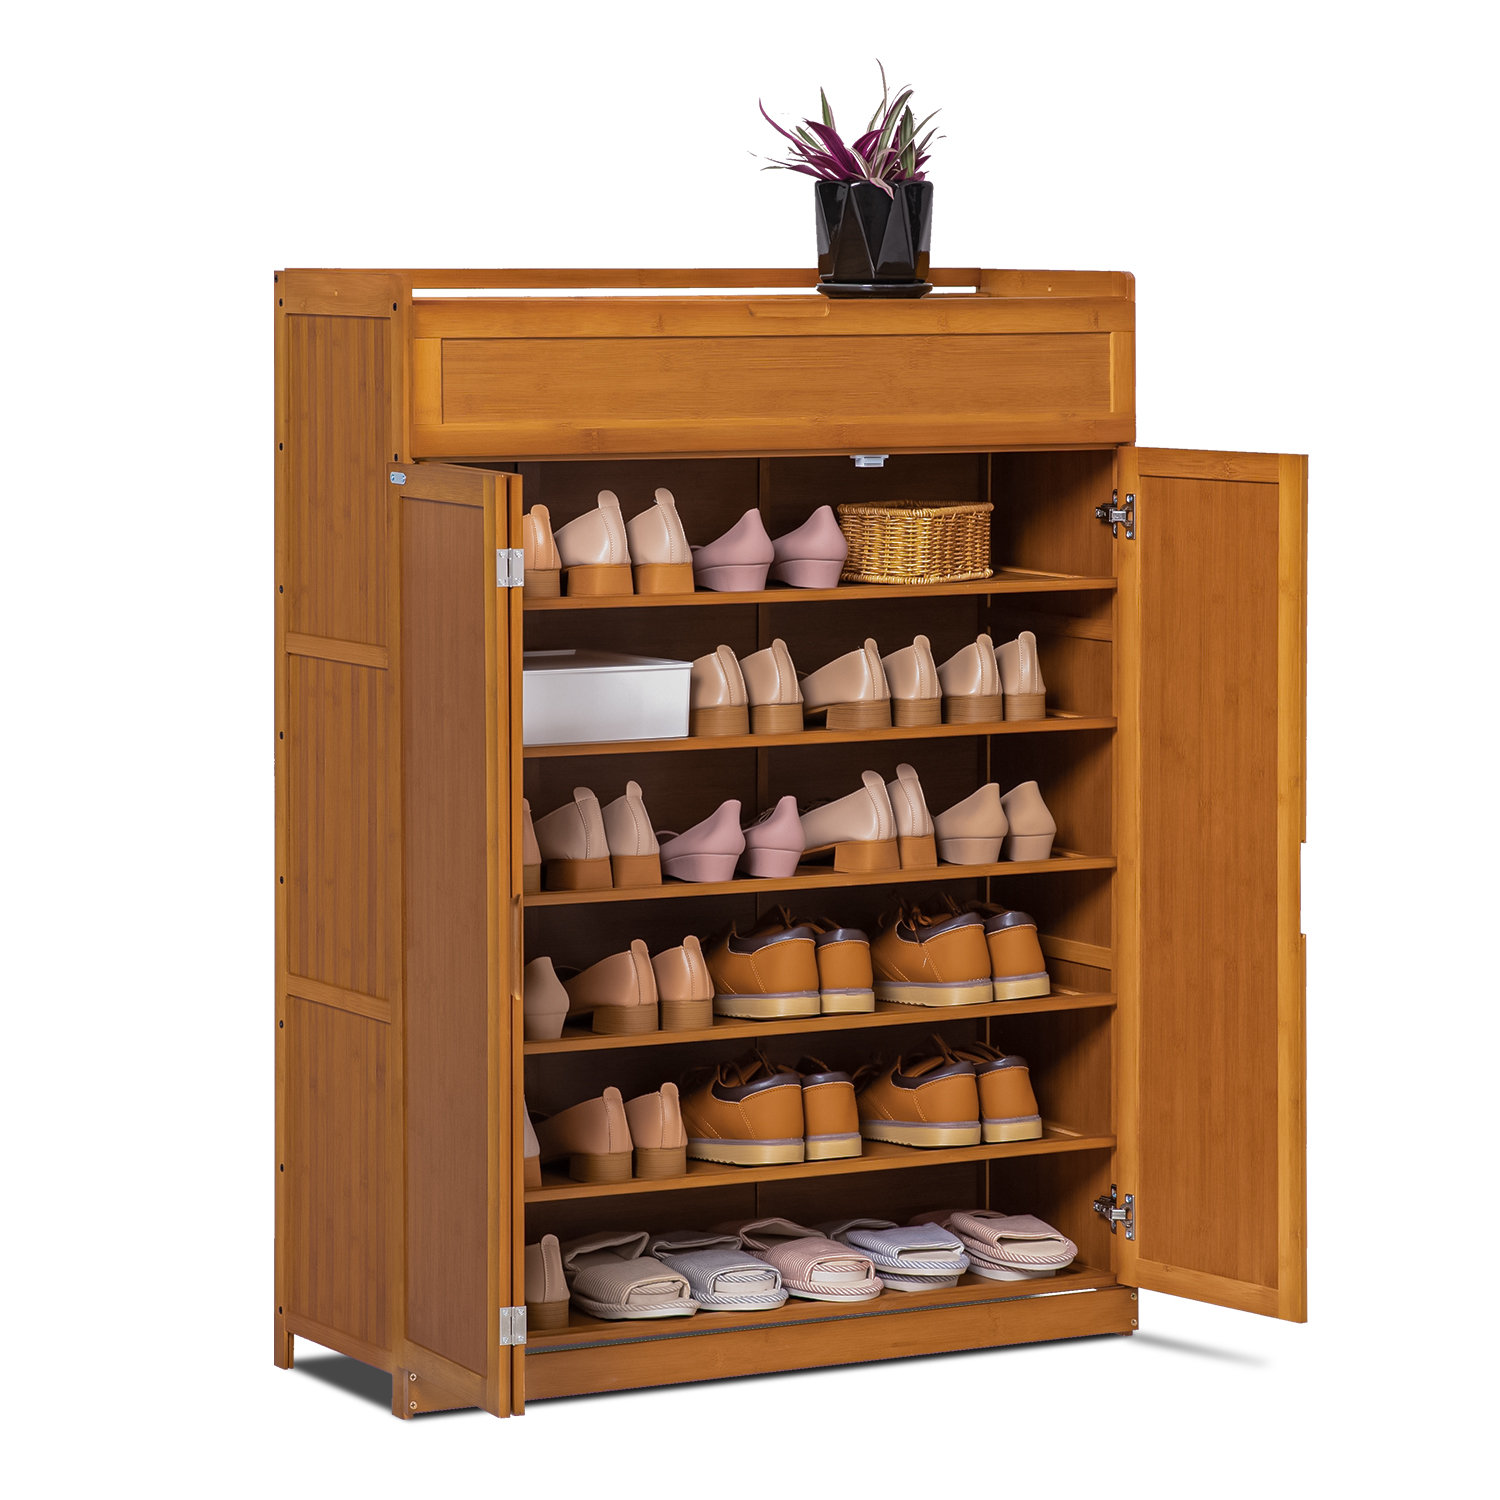 Organize It All Bamboo Shoe Rack with Umbrella Stand, Natural Wood